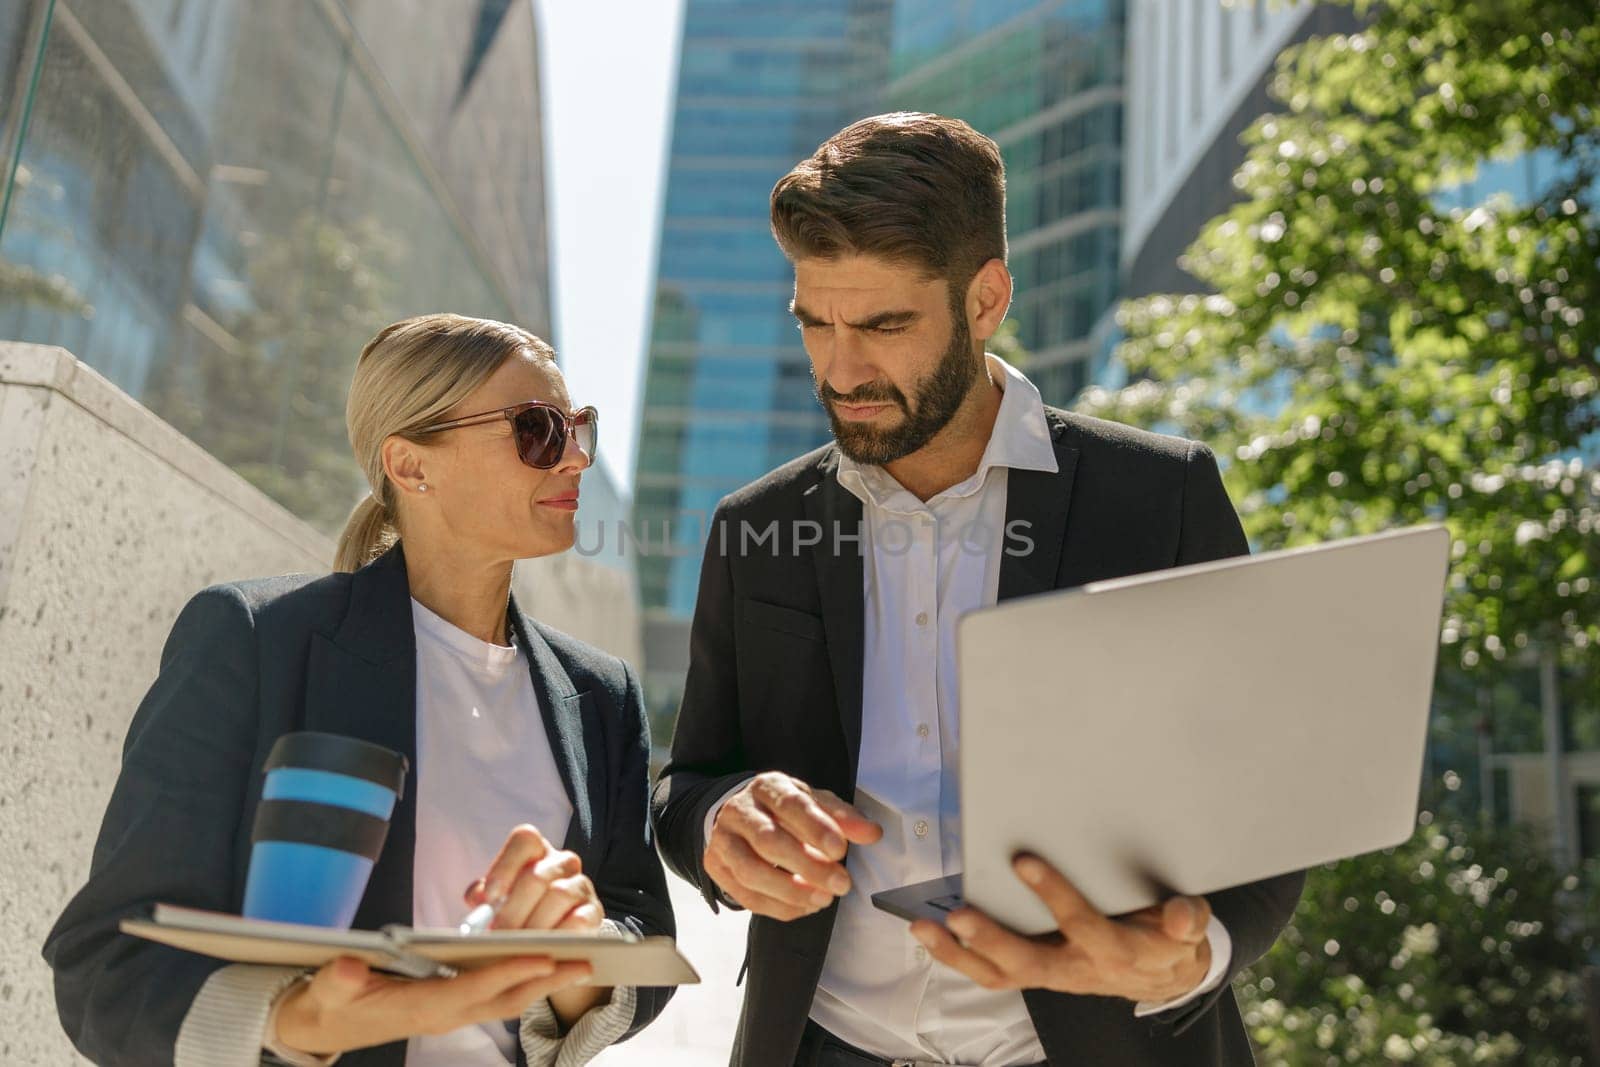 Man and woman in classic suit discussing business details and using laptop while standing outdoors